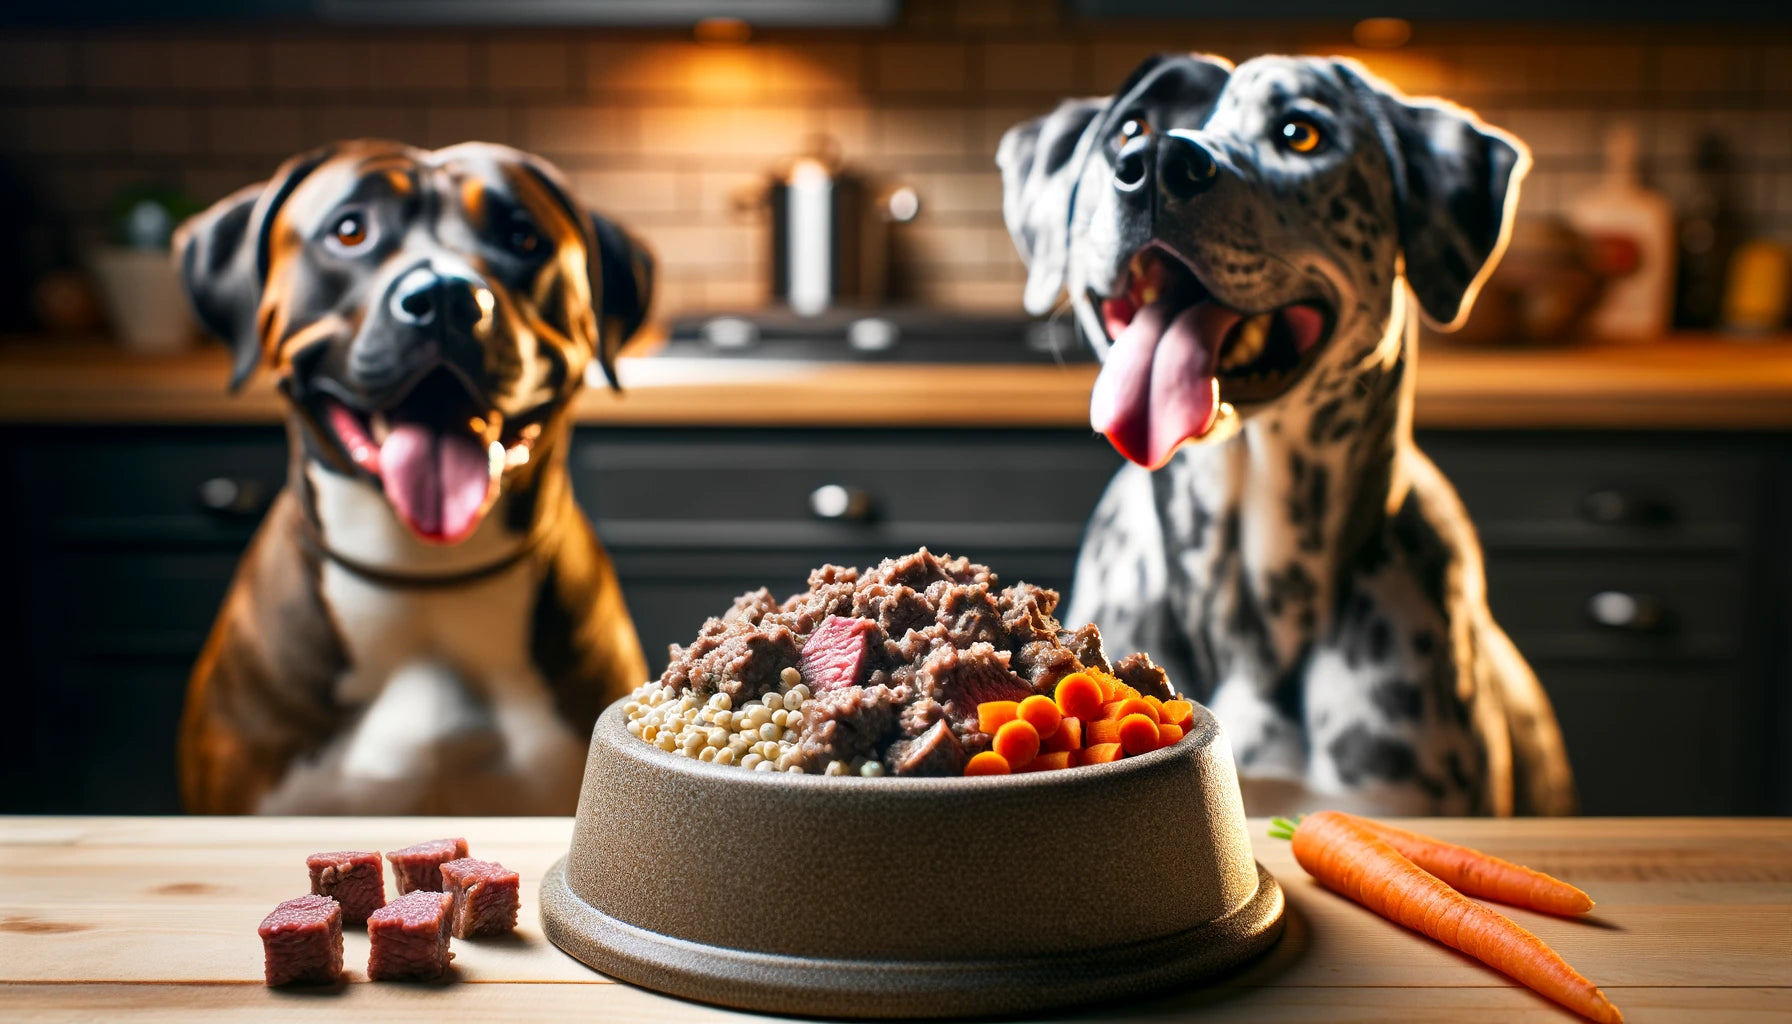 Beefy Barley Bowl in a dog's bowl with a Catahoula Leopard Dog sitting next to it.